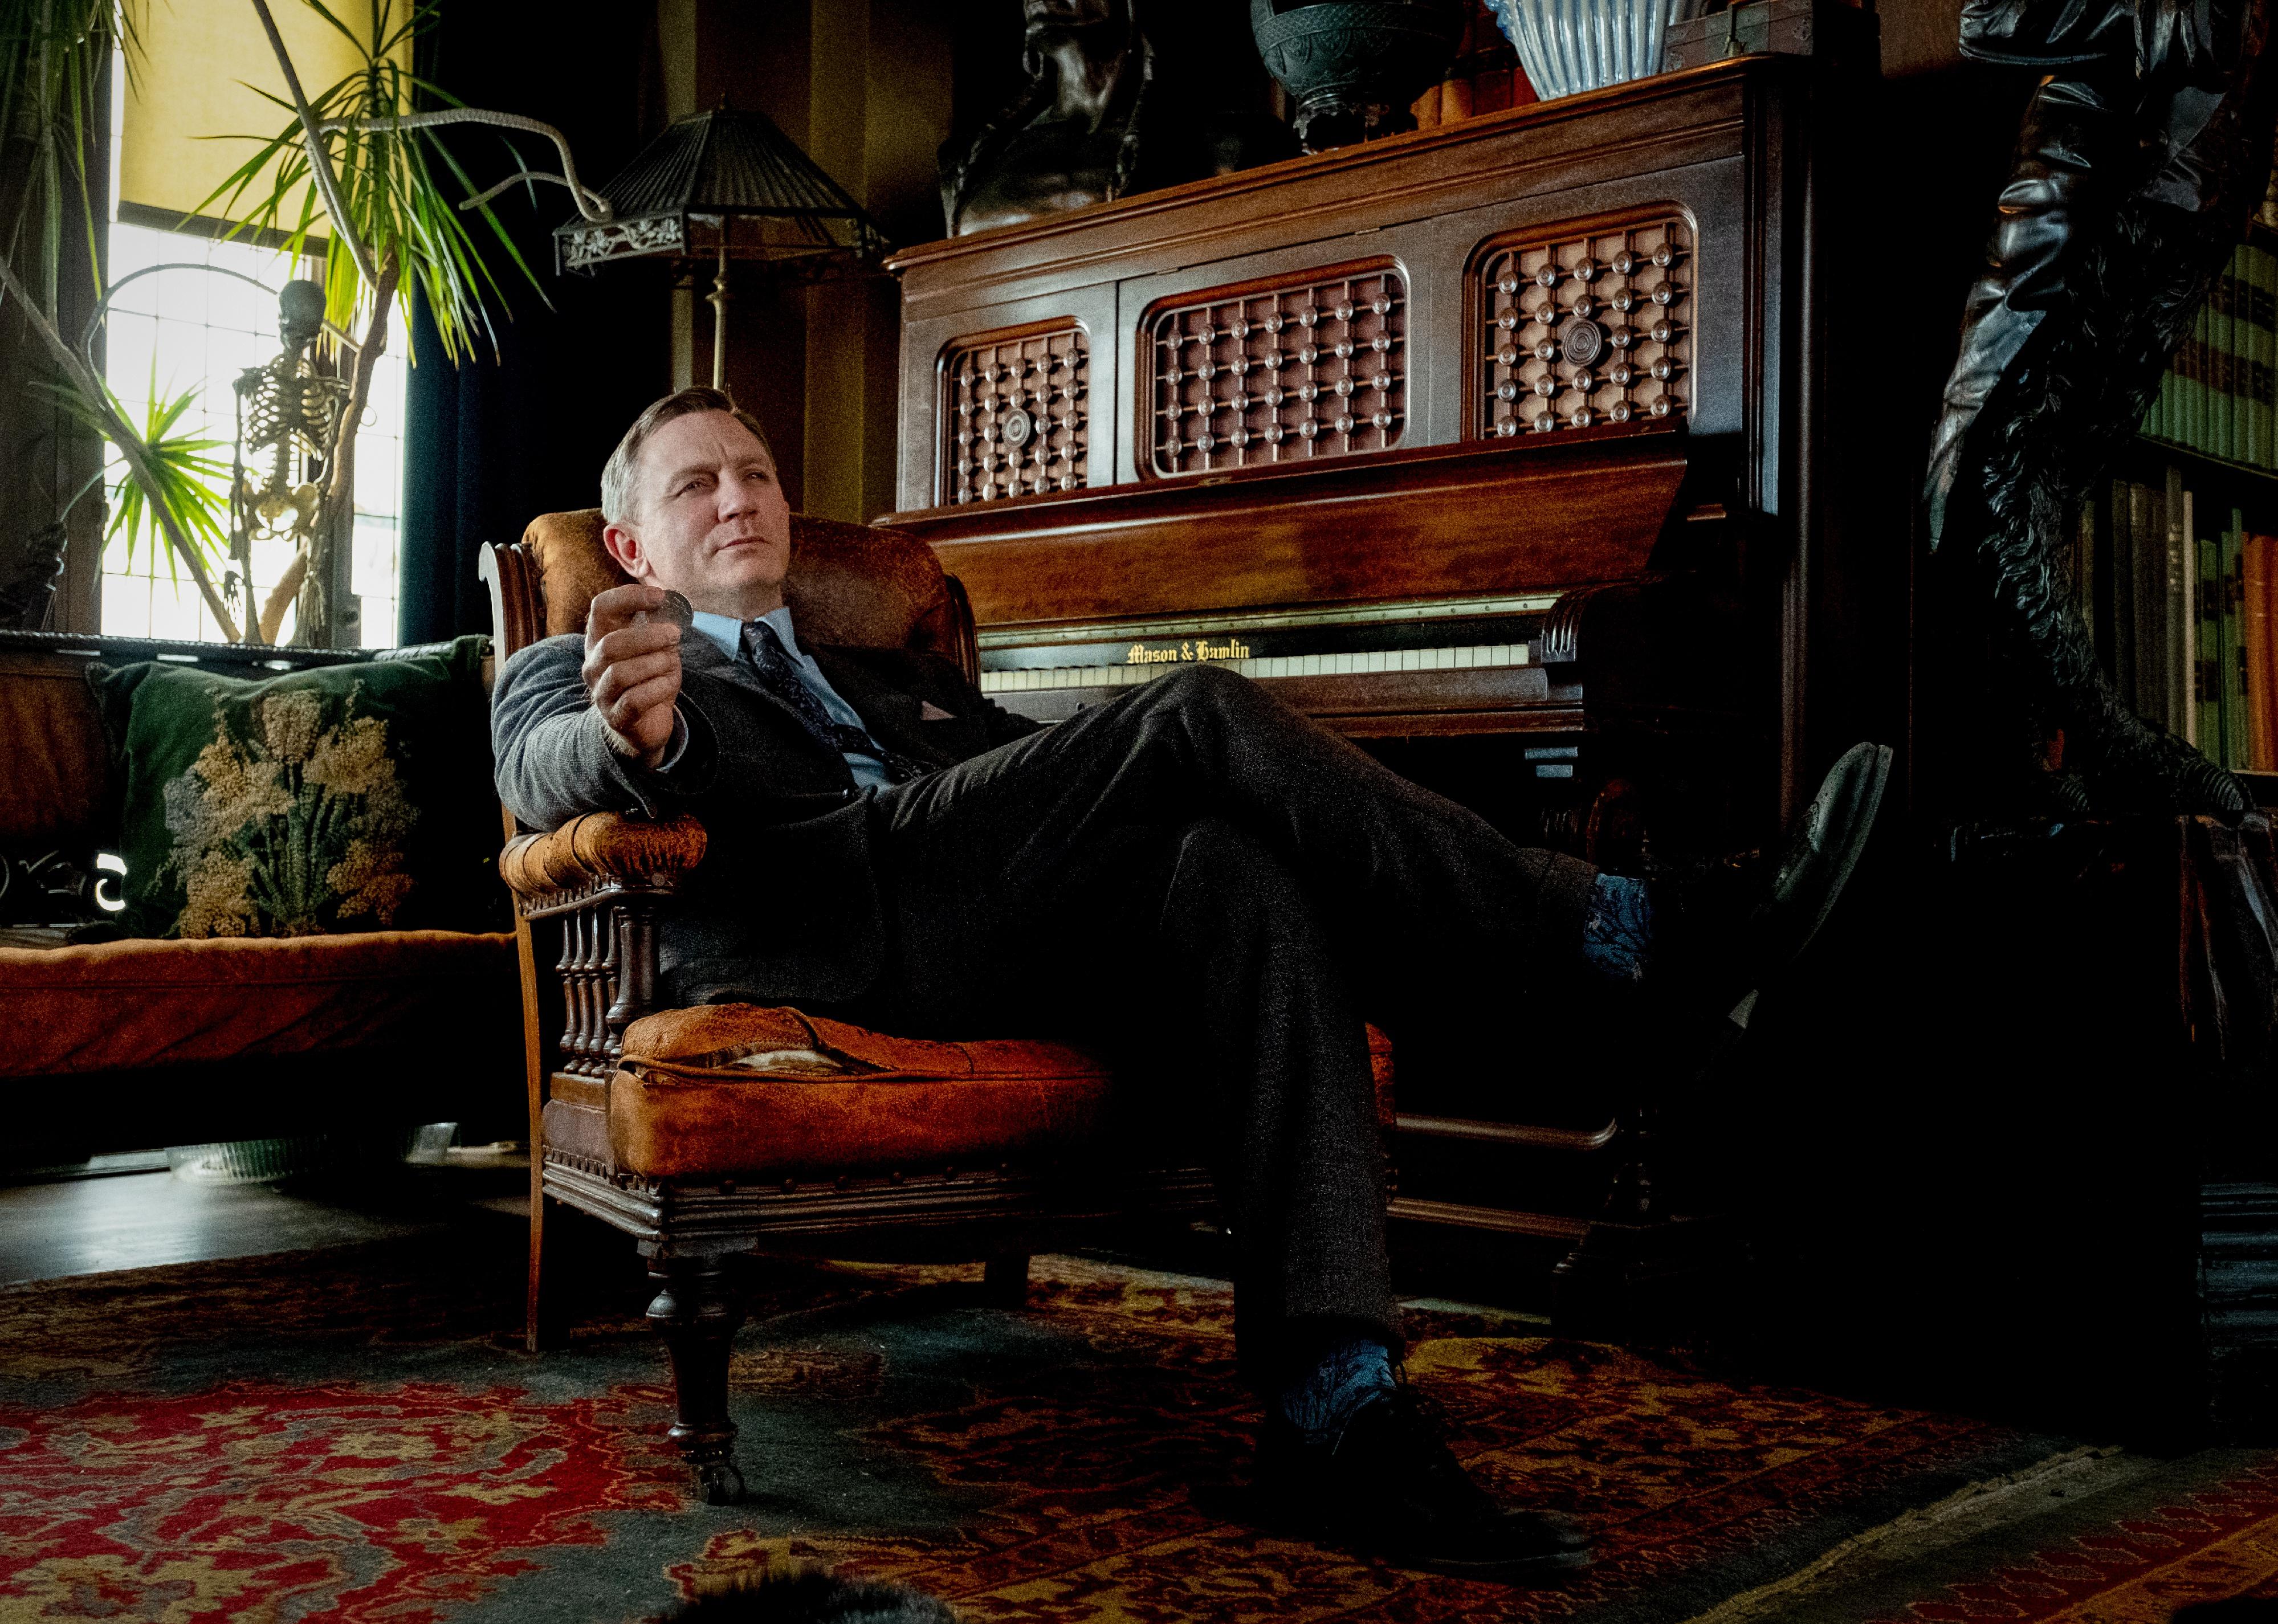 Daniel Craig in a suit sitting in a chair next to a piano in a dark wood room.